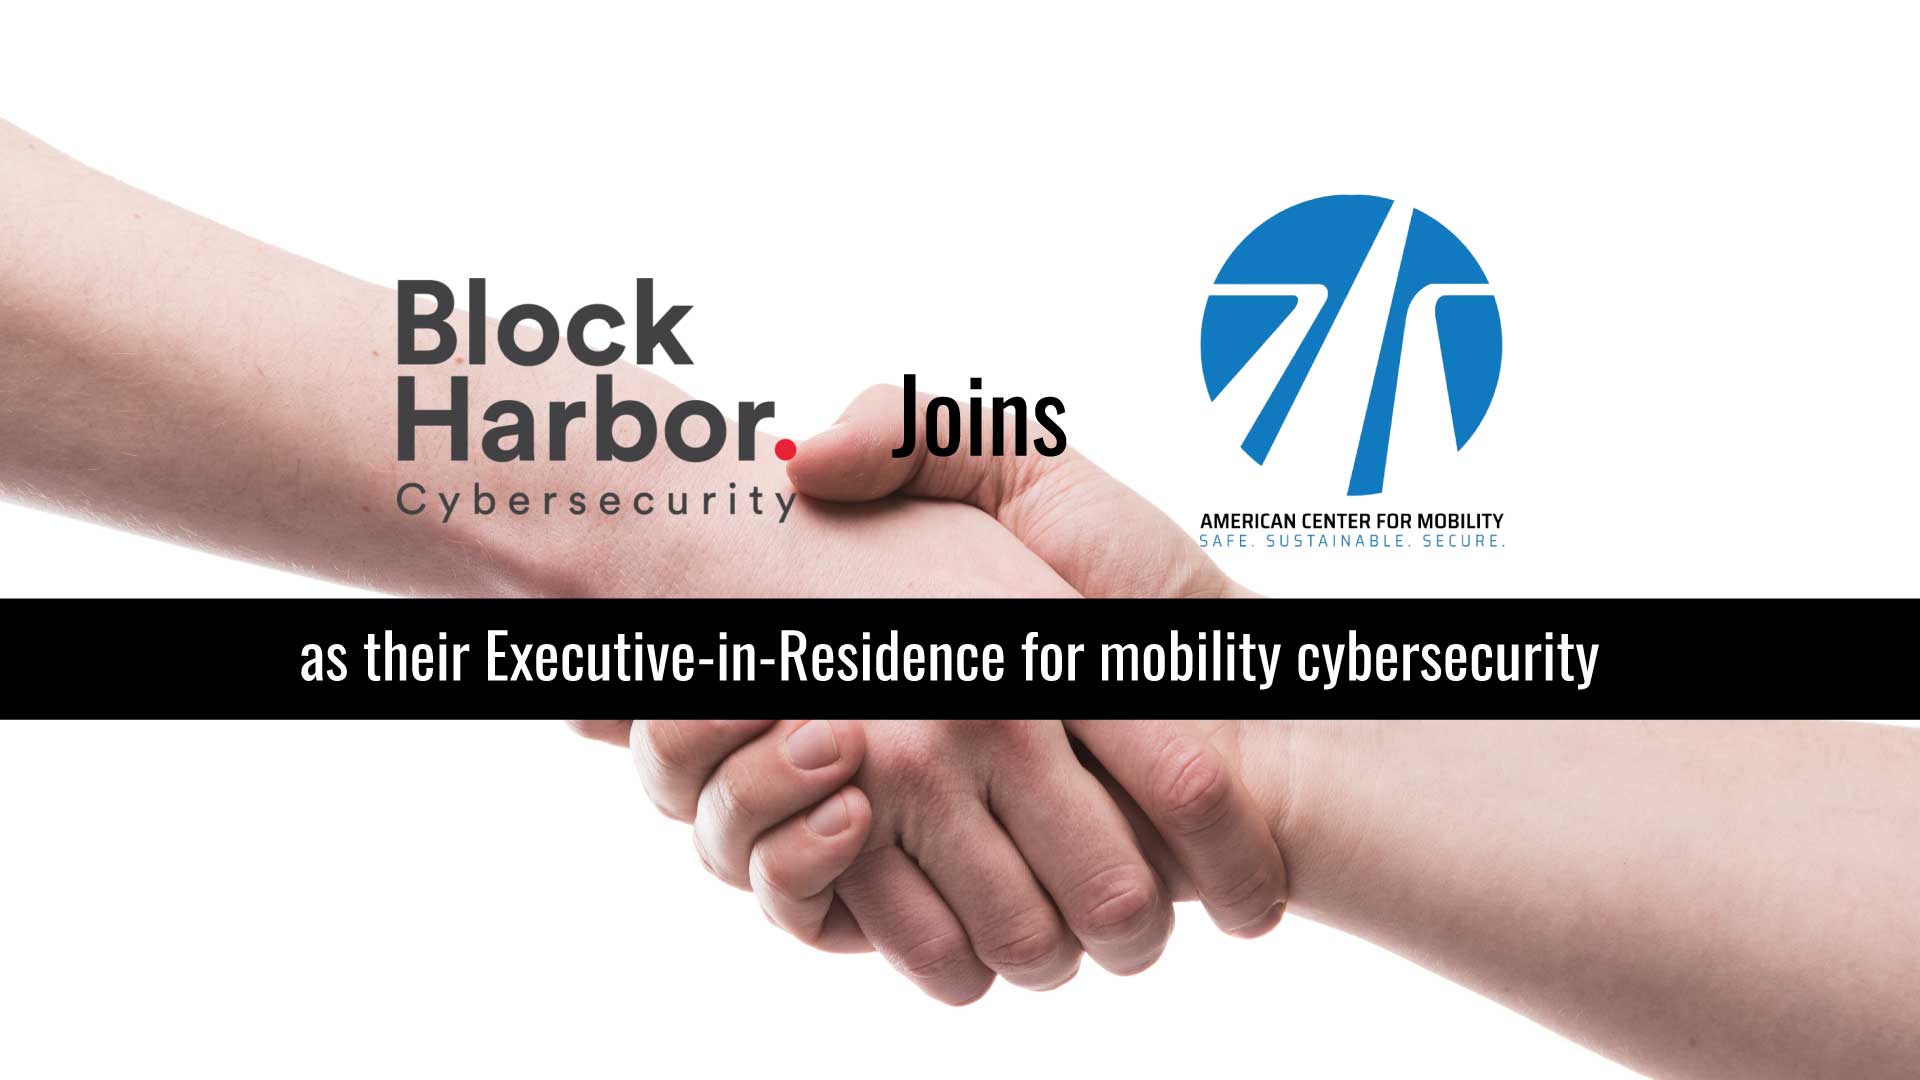 American Center for Mobility and Block Harbor Collaborate to Develop Cybersecurity Offerings at ACM's Global Development Center